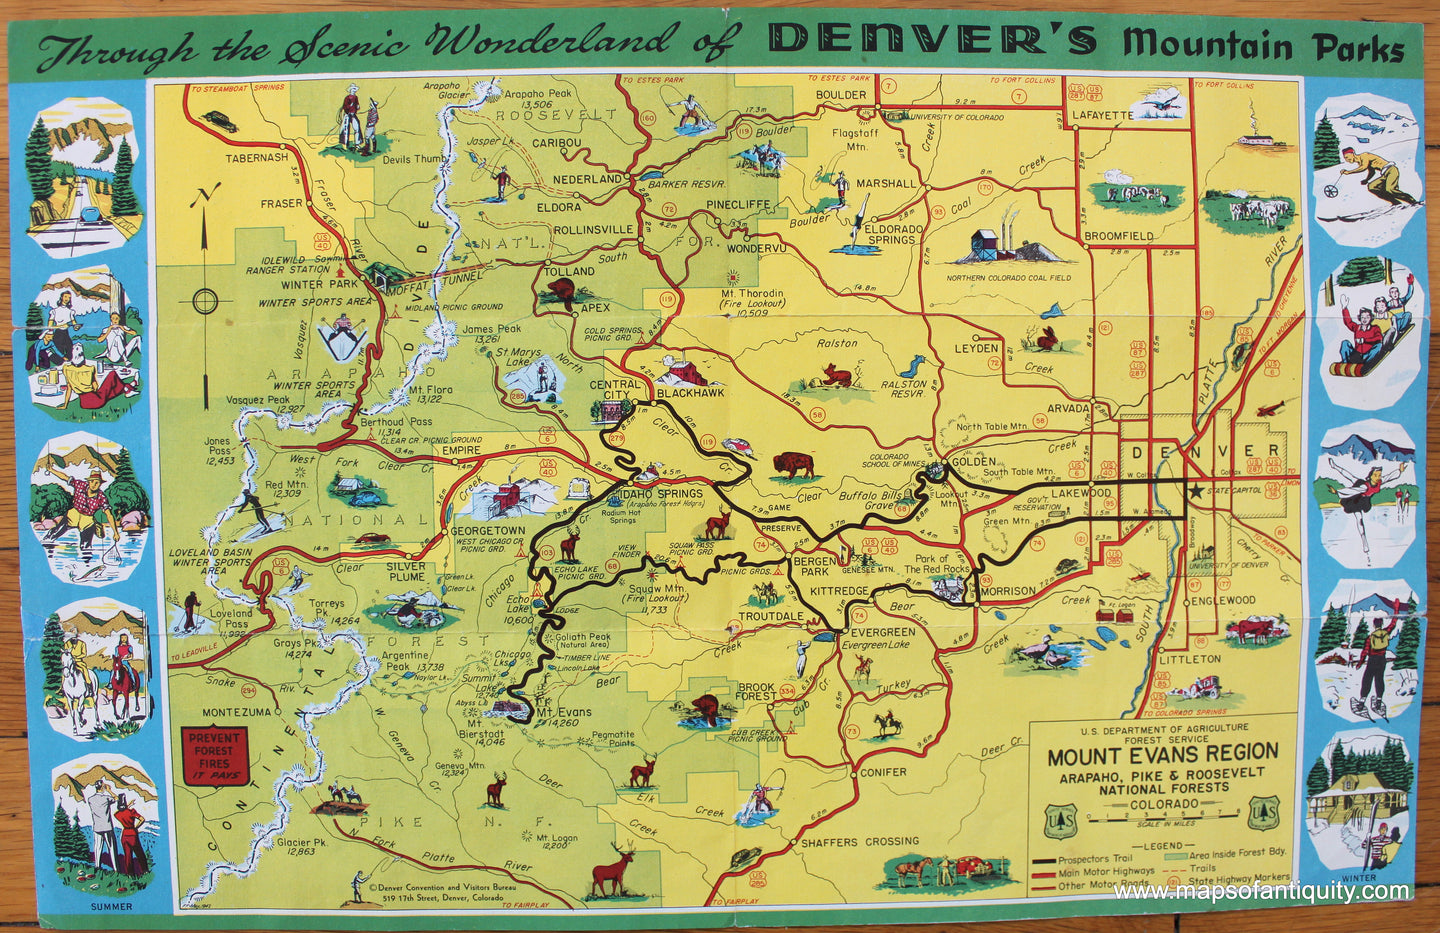 Antique-Printed-Color-Pictorial-Map-Through-the-Scenic-Wonderland-of-Denver's-Mountain-Parks-or-Adventure-Map-Prospectors-Trail-c.-1955-US-Forest-Service-Smith-Brook-Printing-Co.-West-Colorado-1900s-1950s-20th-century-Maps-of-Antiquity